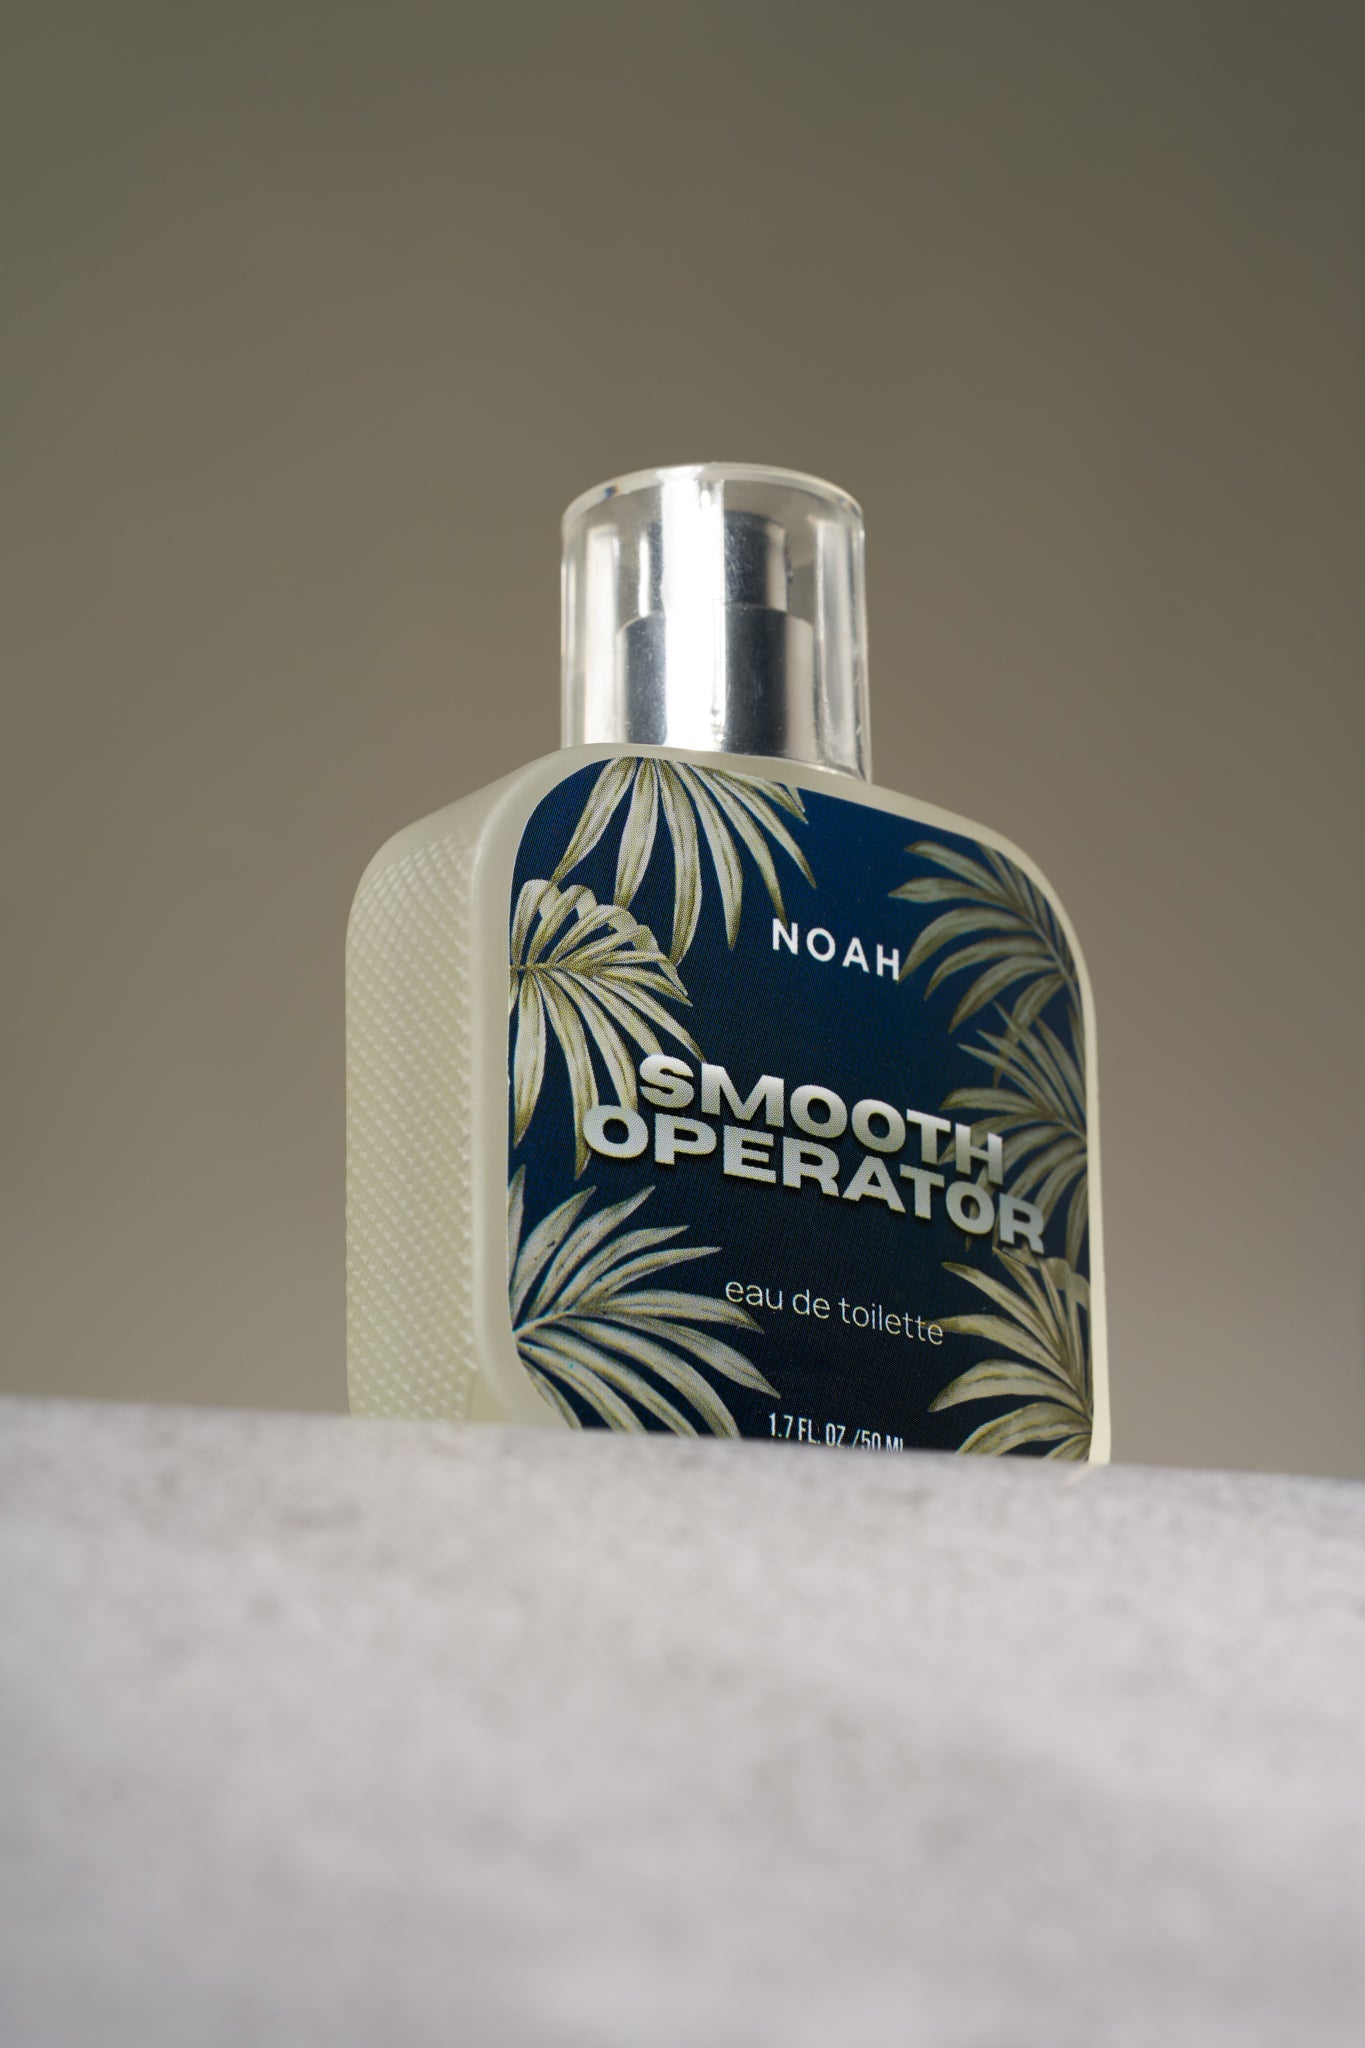 NOAH SMOOTH OPERATOR EDT (Lasts up to 4-6 hours)